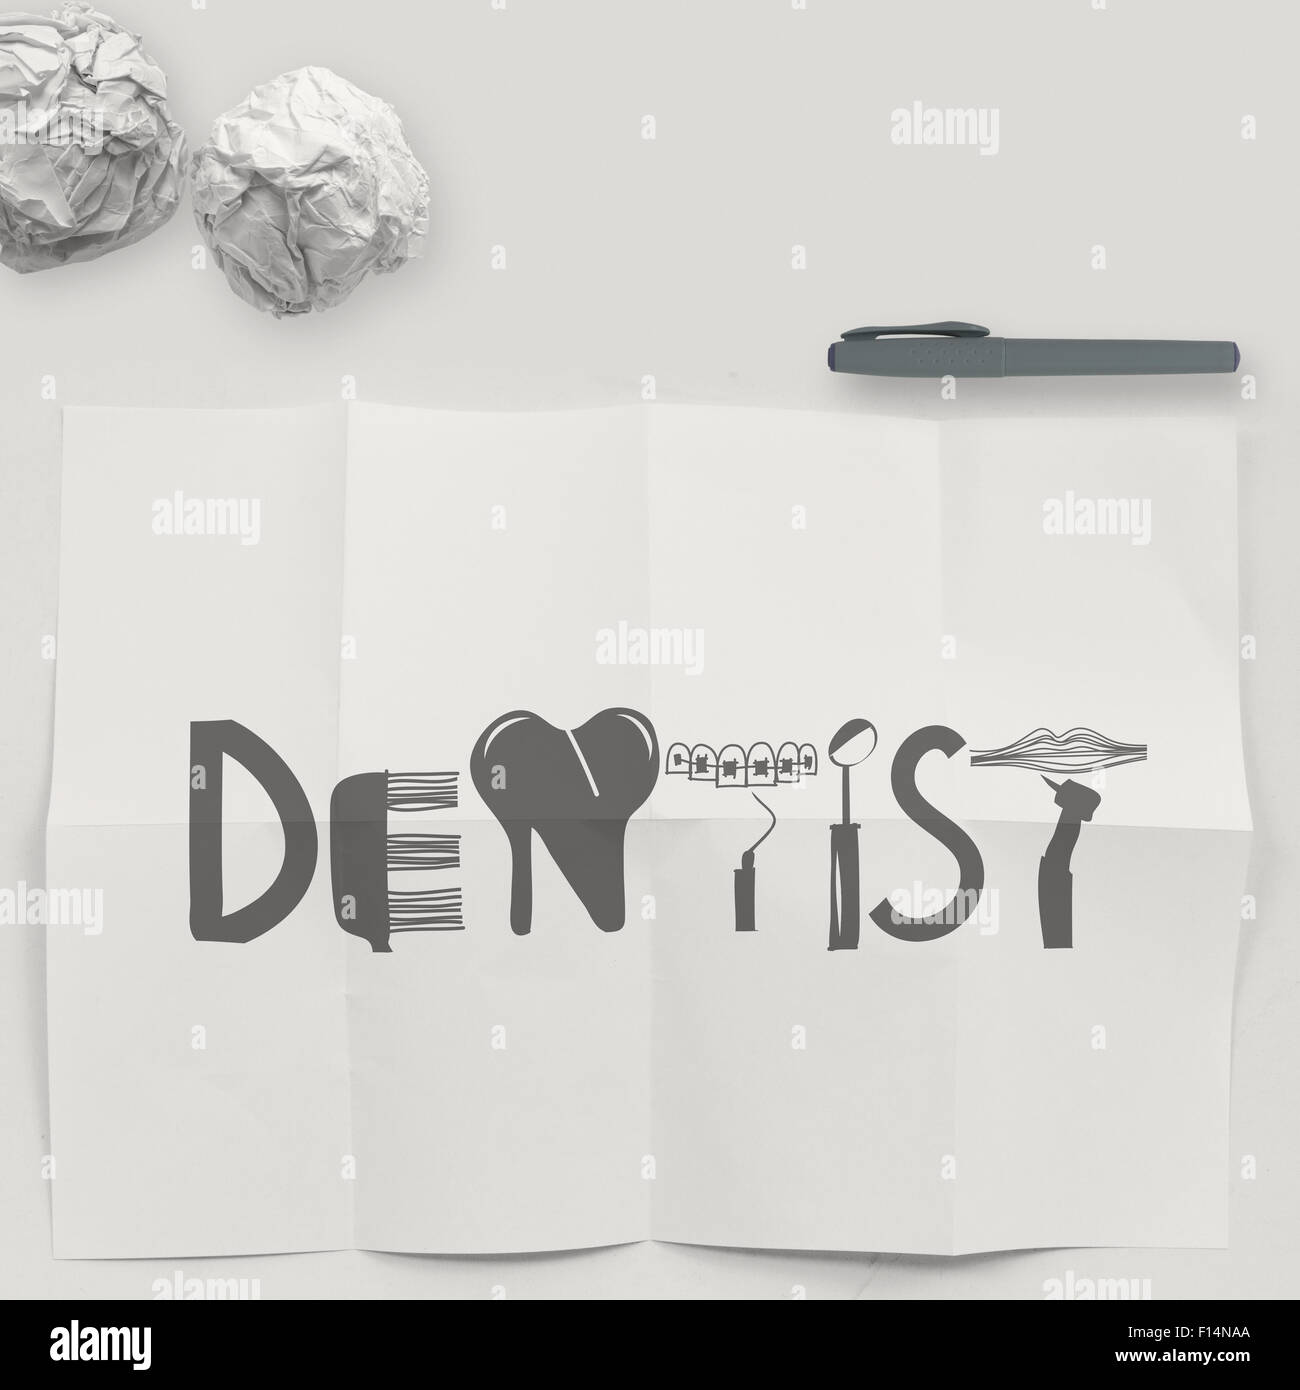 design word DENTIST on white crumpled paper and texture background as concept Stock Photo